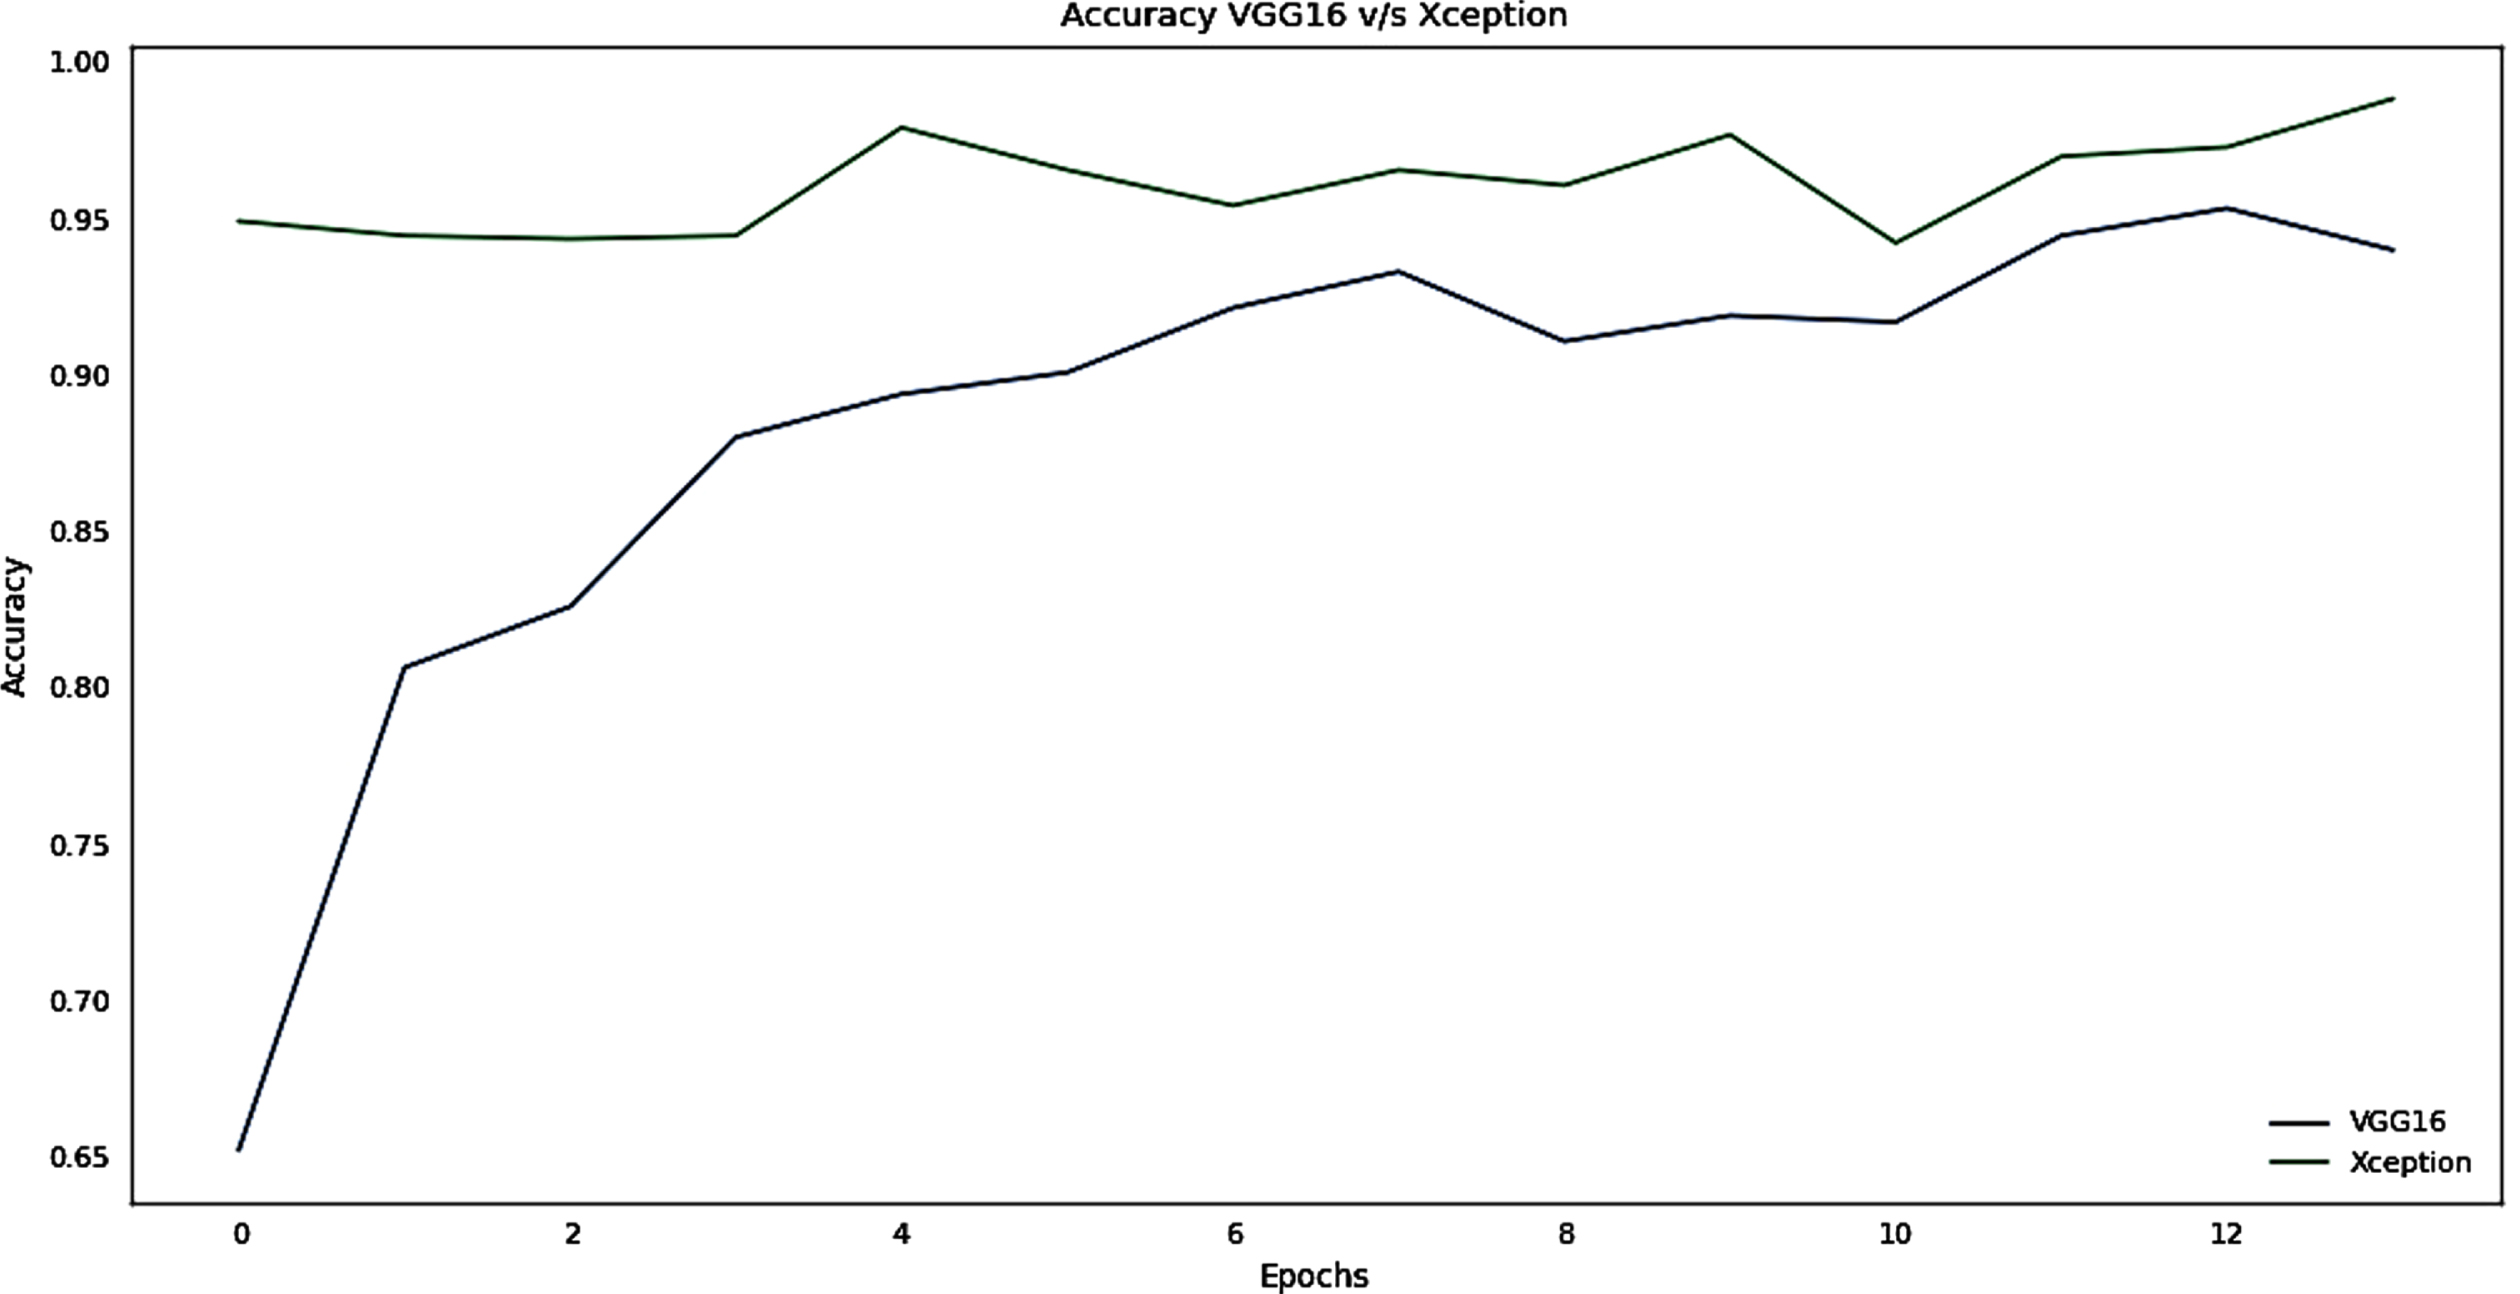 Accuracy graph for the training phase of VGG16 v/s Xception.